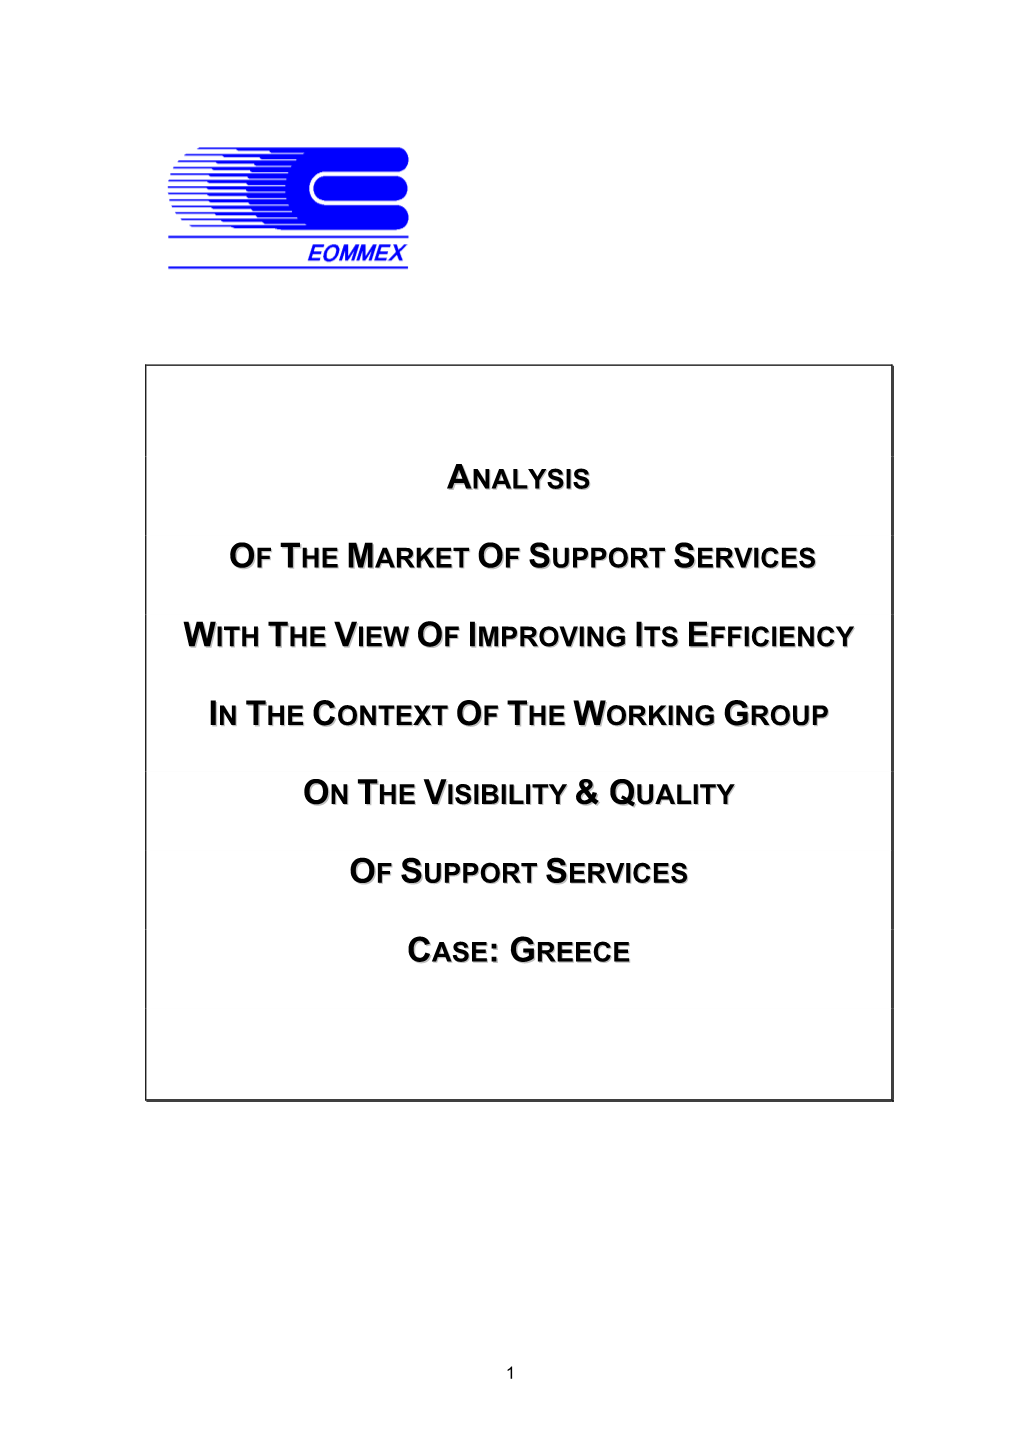 Analysis of the Market of Support Services with the View of Improving